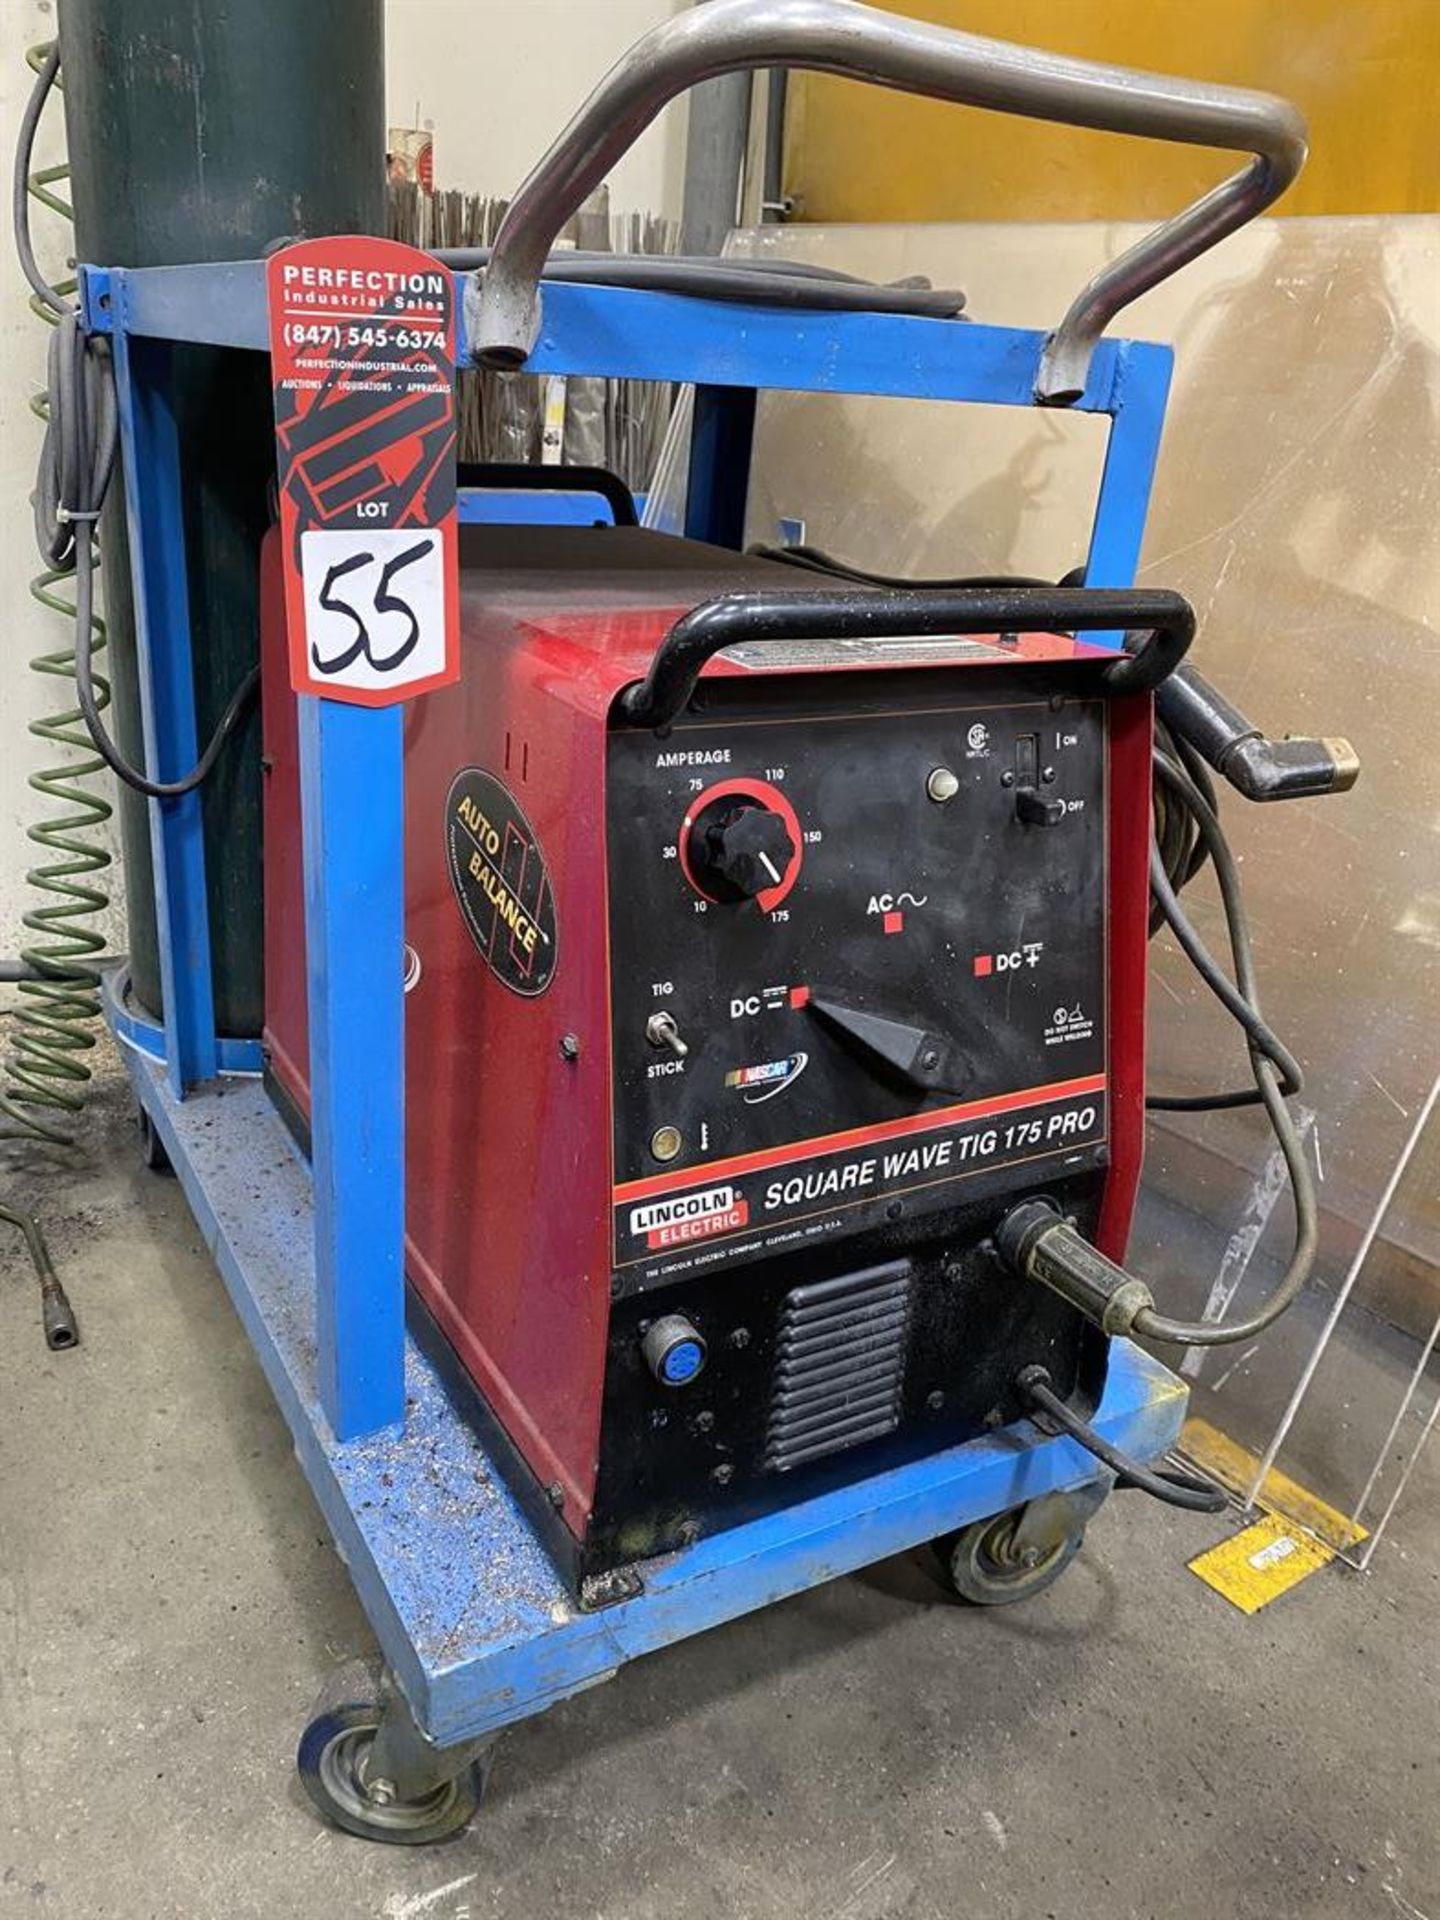 lincoln-square-wave-tig-175-pro-welding-power-source-s-n-u1010103515